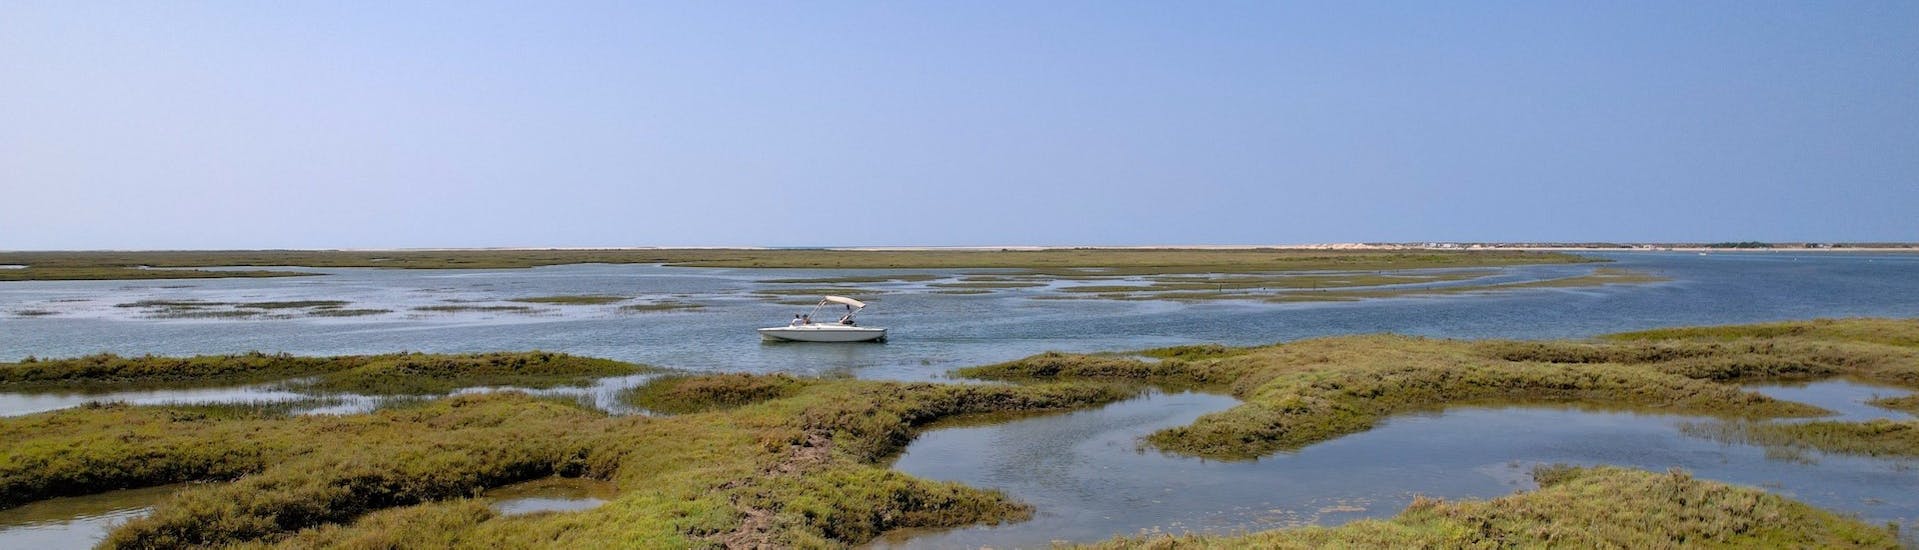 The view of the Marshes of Ria Formosa during the Boat Trip from Faro along the Marshes of Ria Formosa.